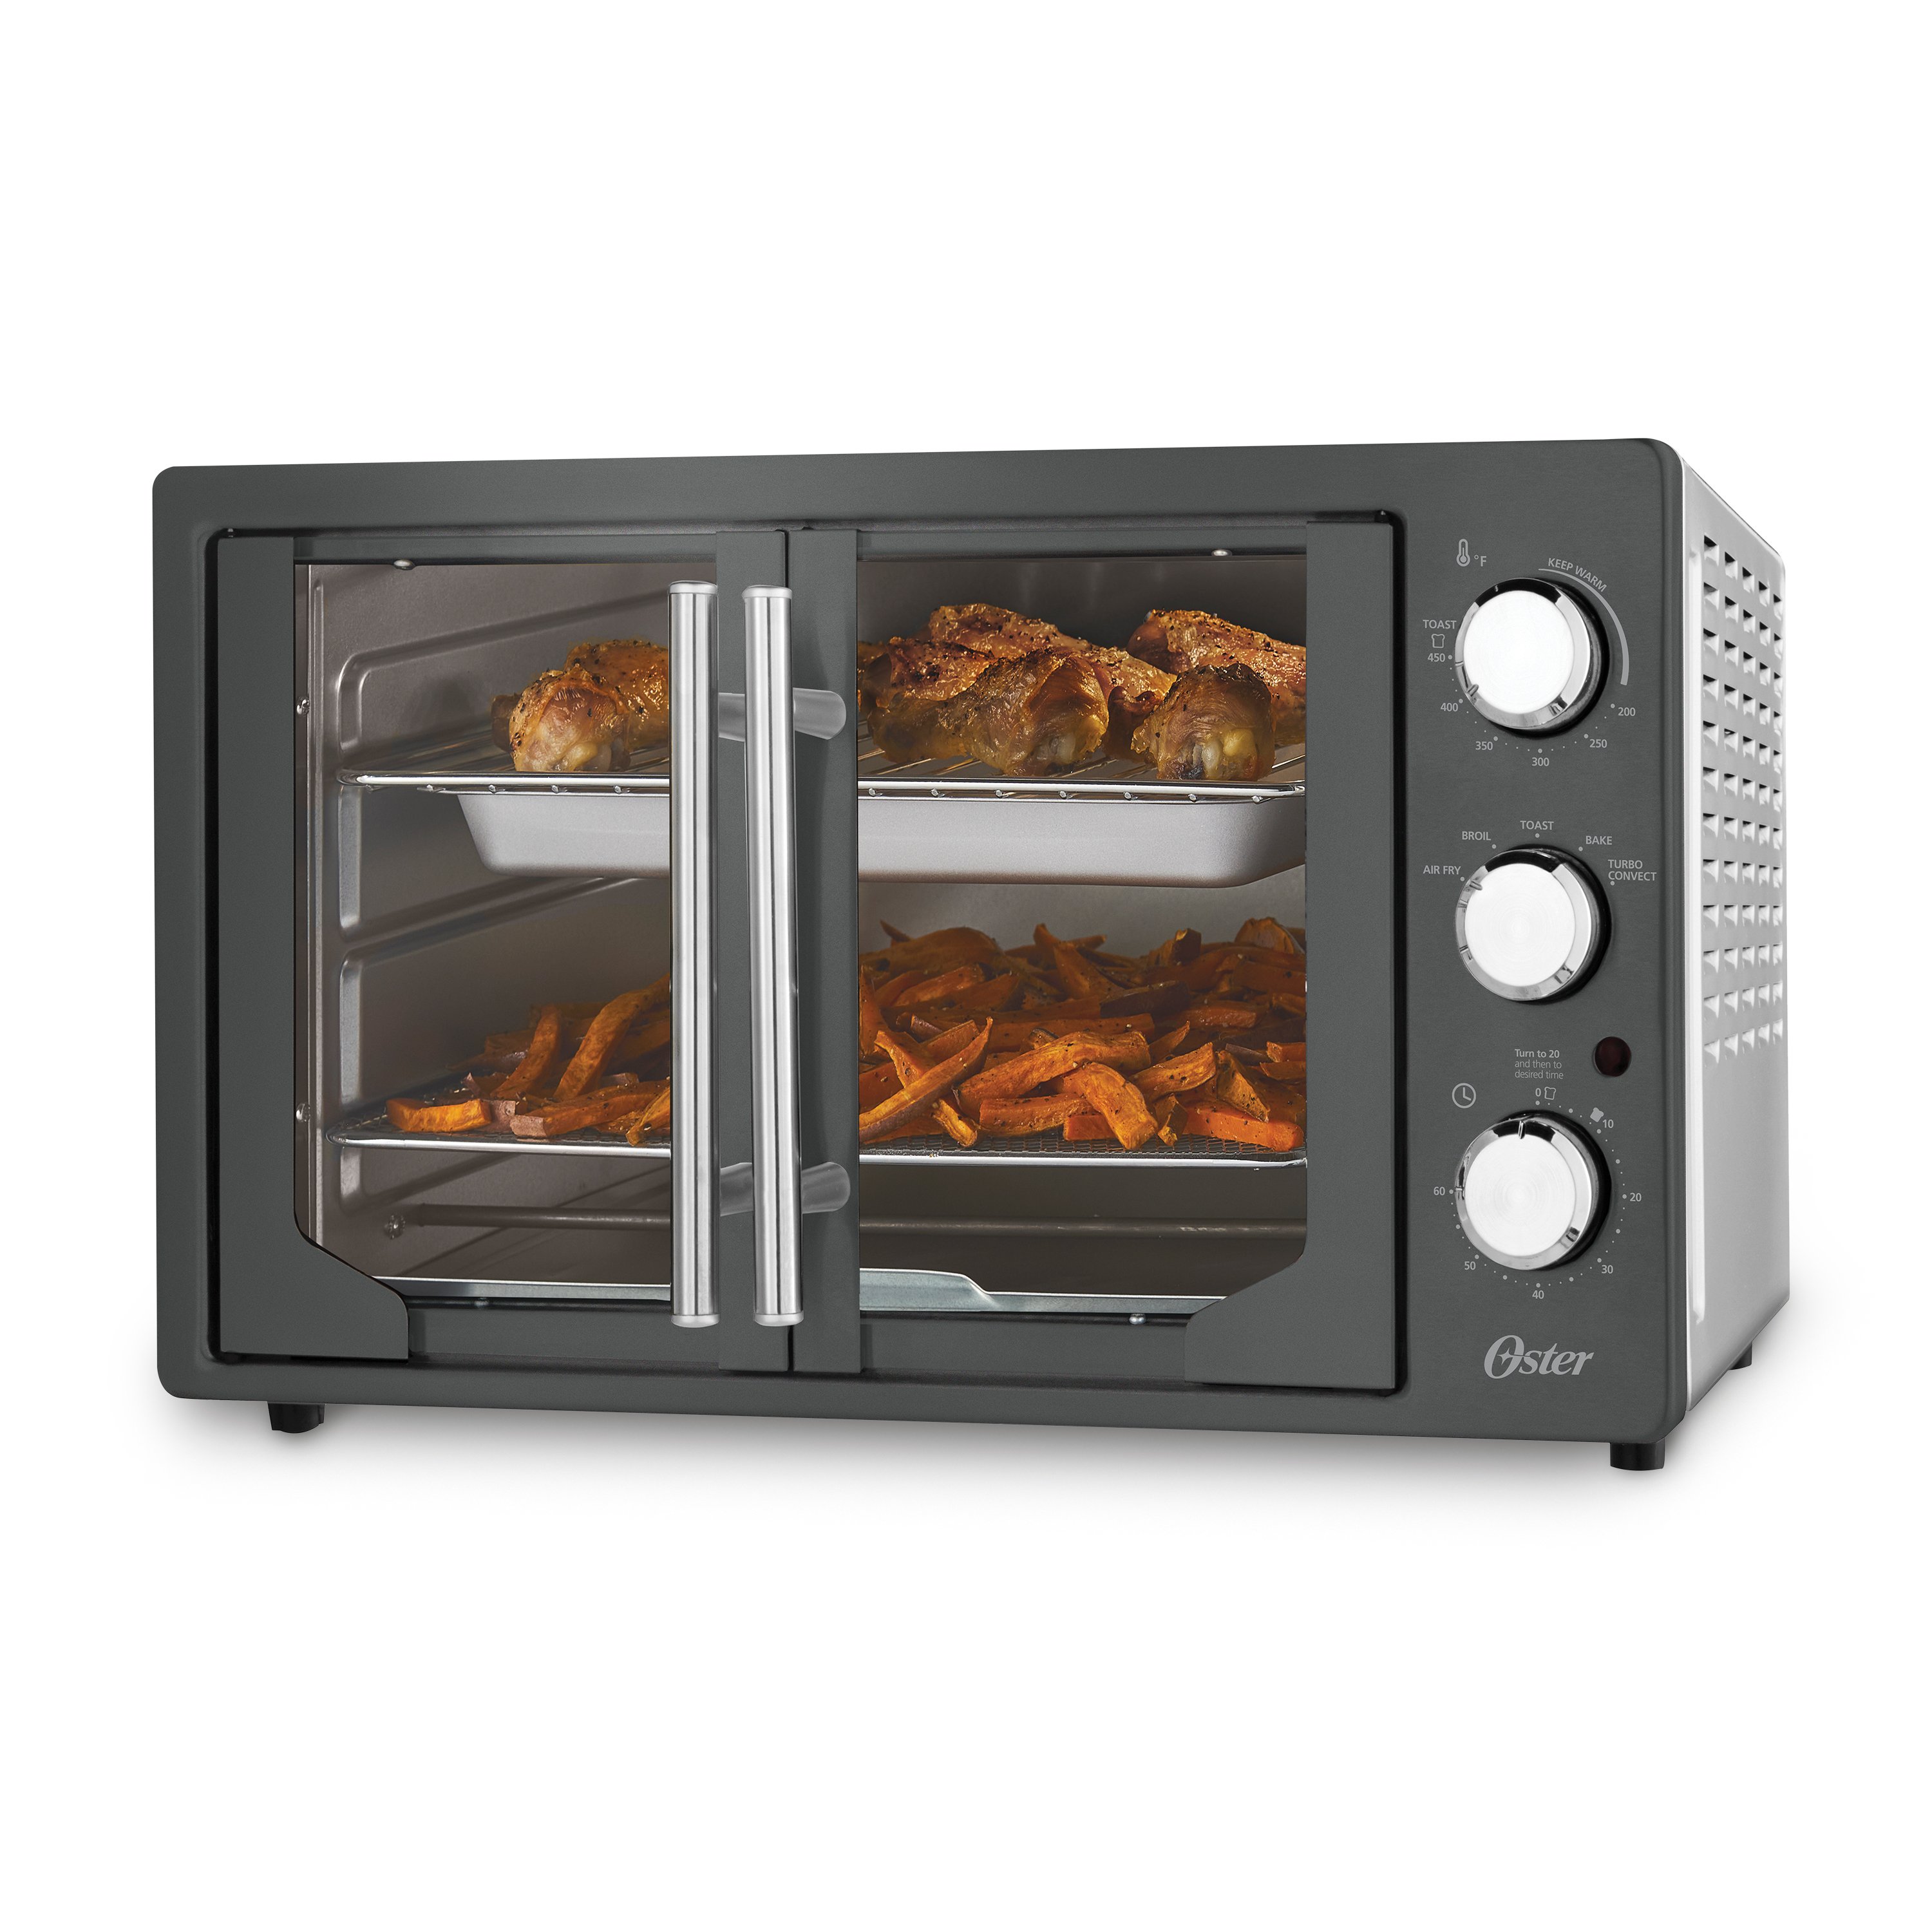 Get two pizzas in Oster's family-sized air fry oven at a new